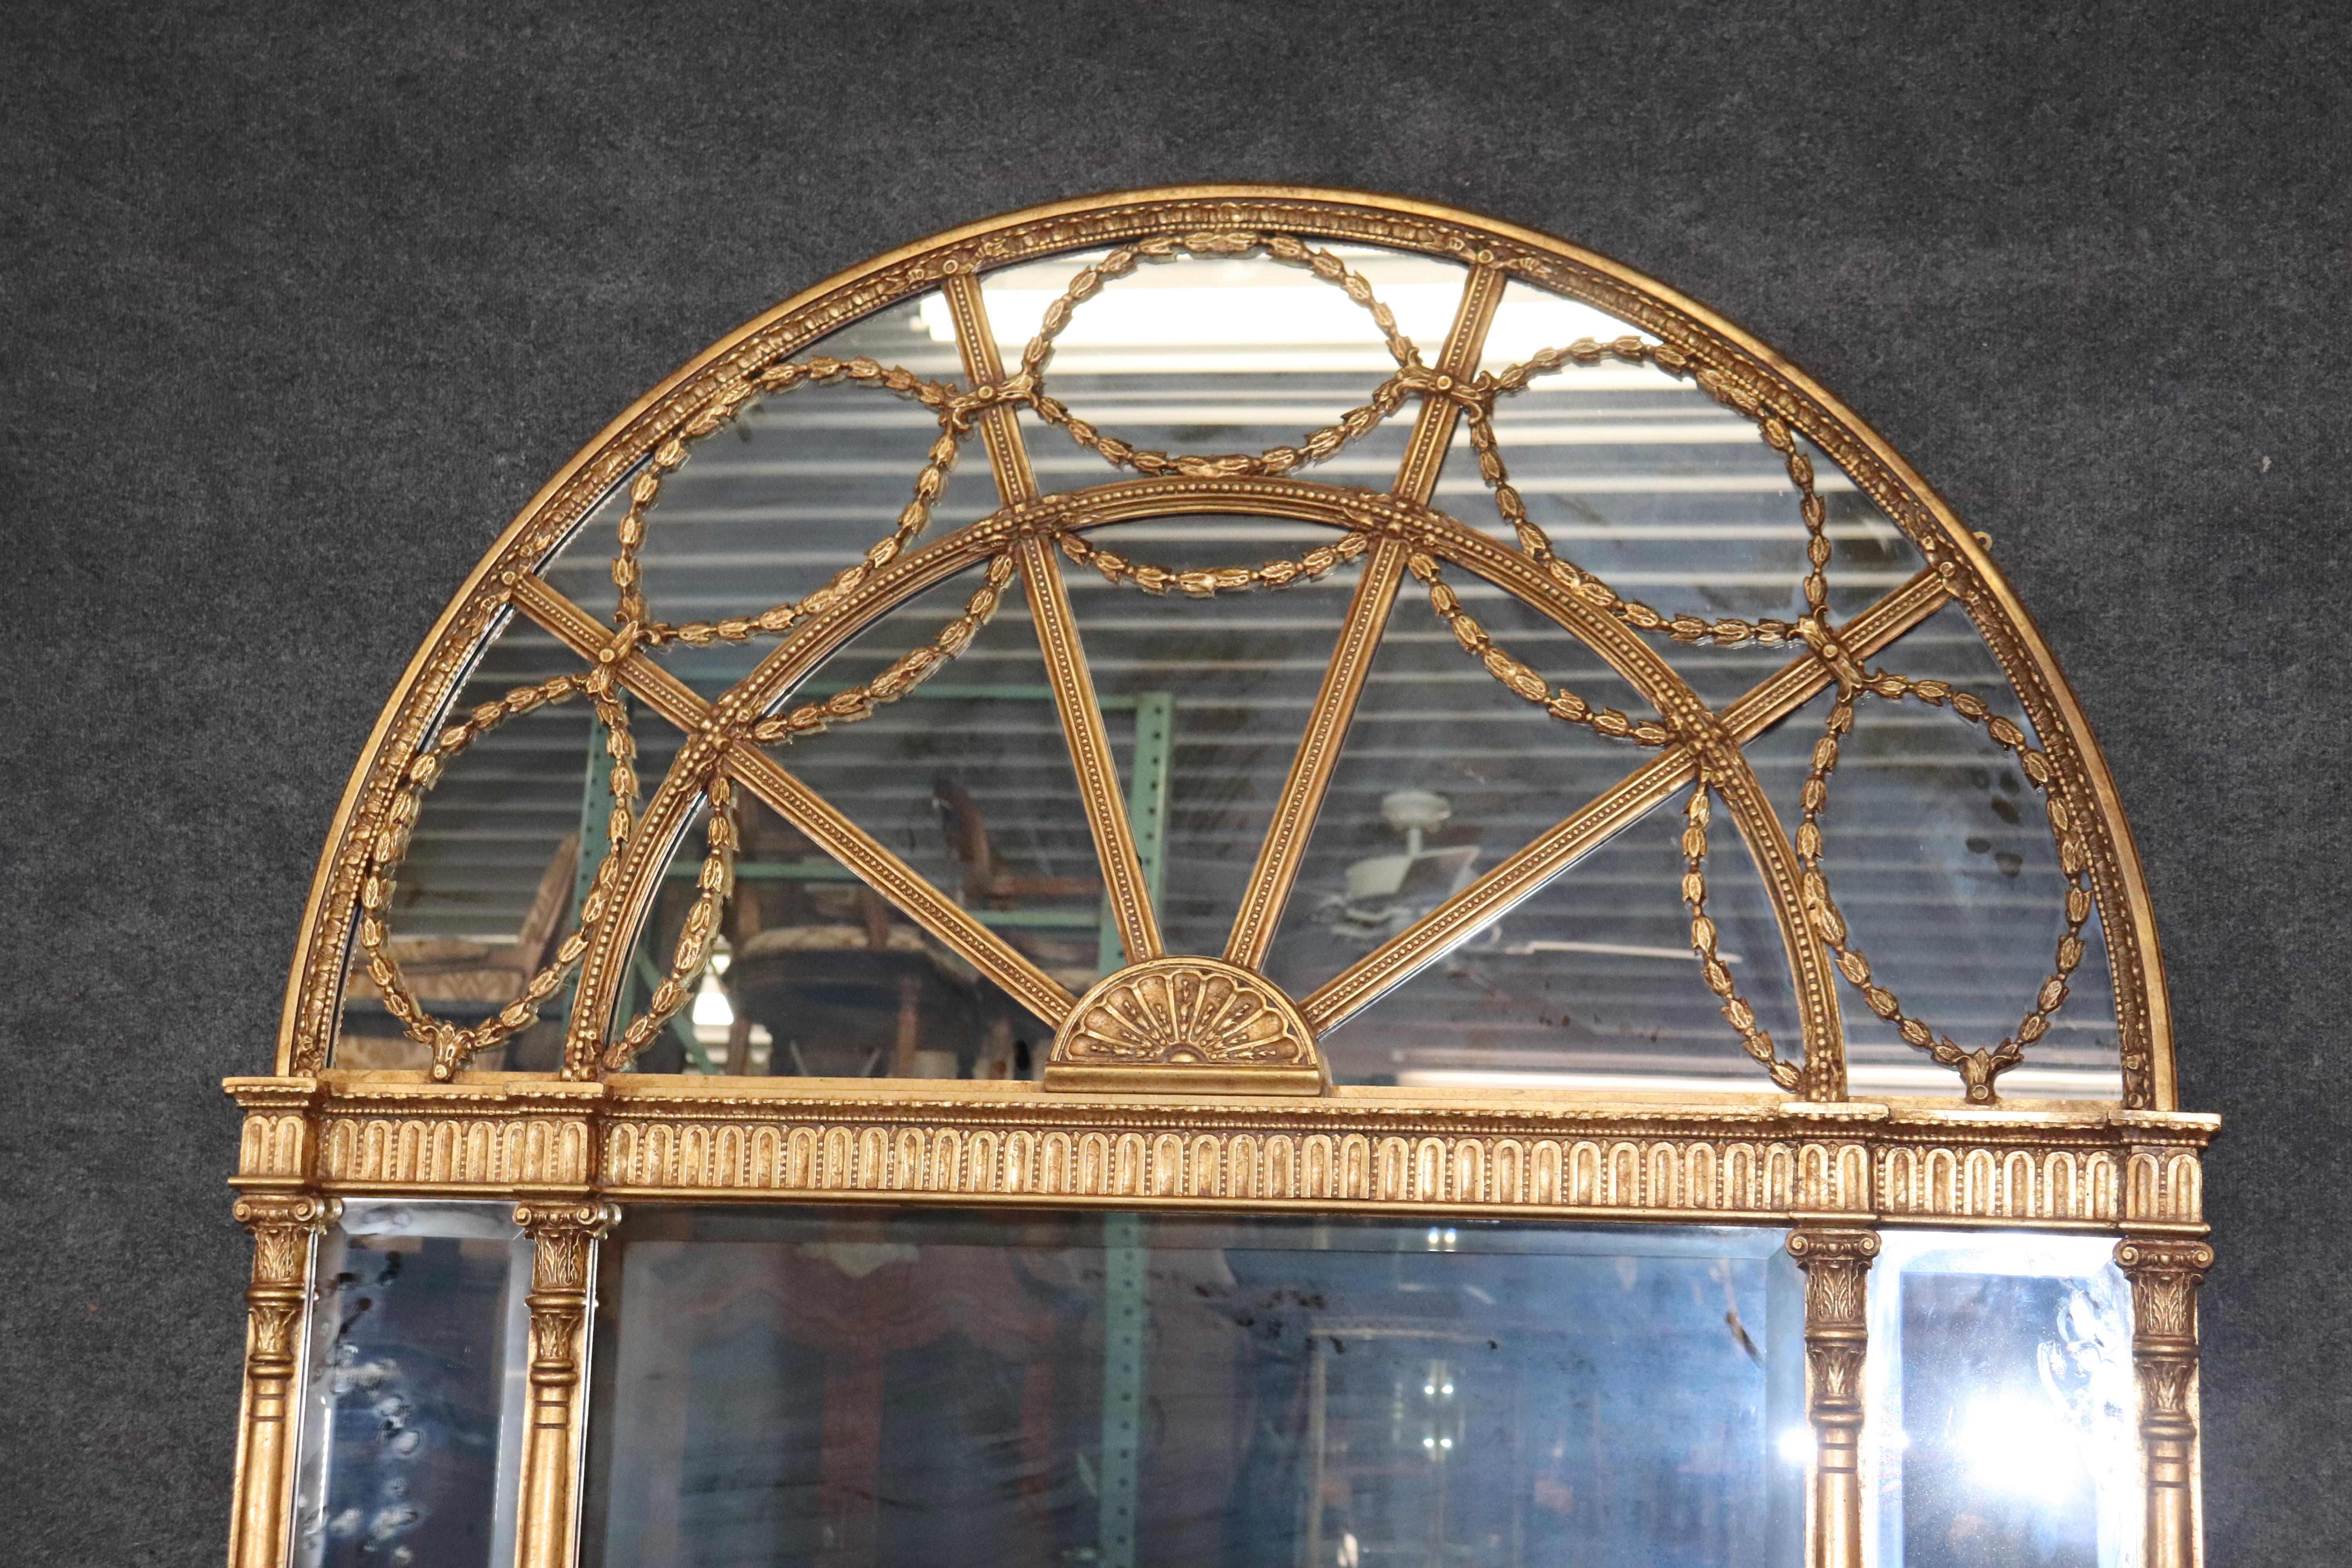 Neoclassical Revival Monumental Gilded Arched Decorative Arts Neoclassical Wall Mantle Mantel Mirror